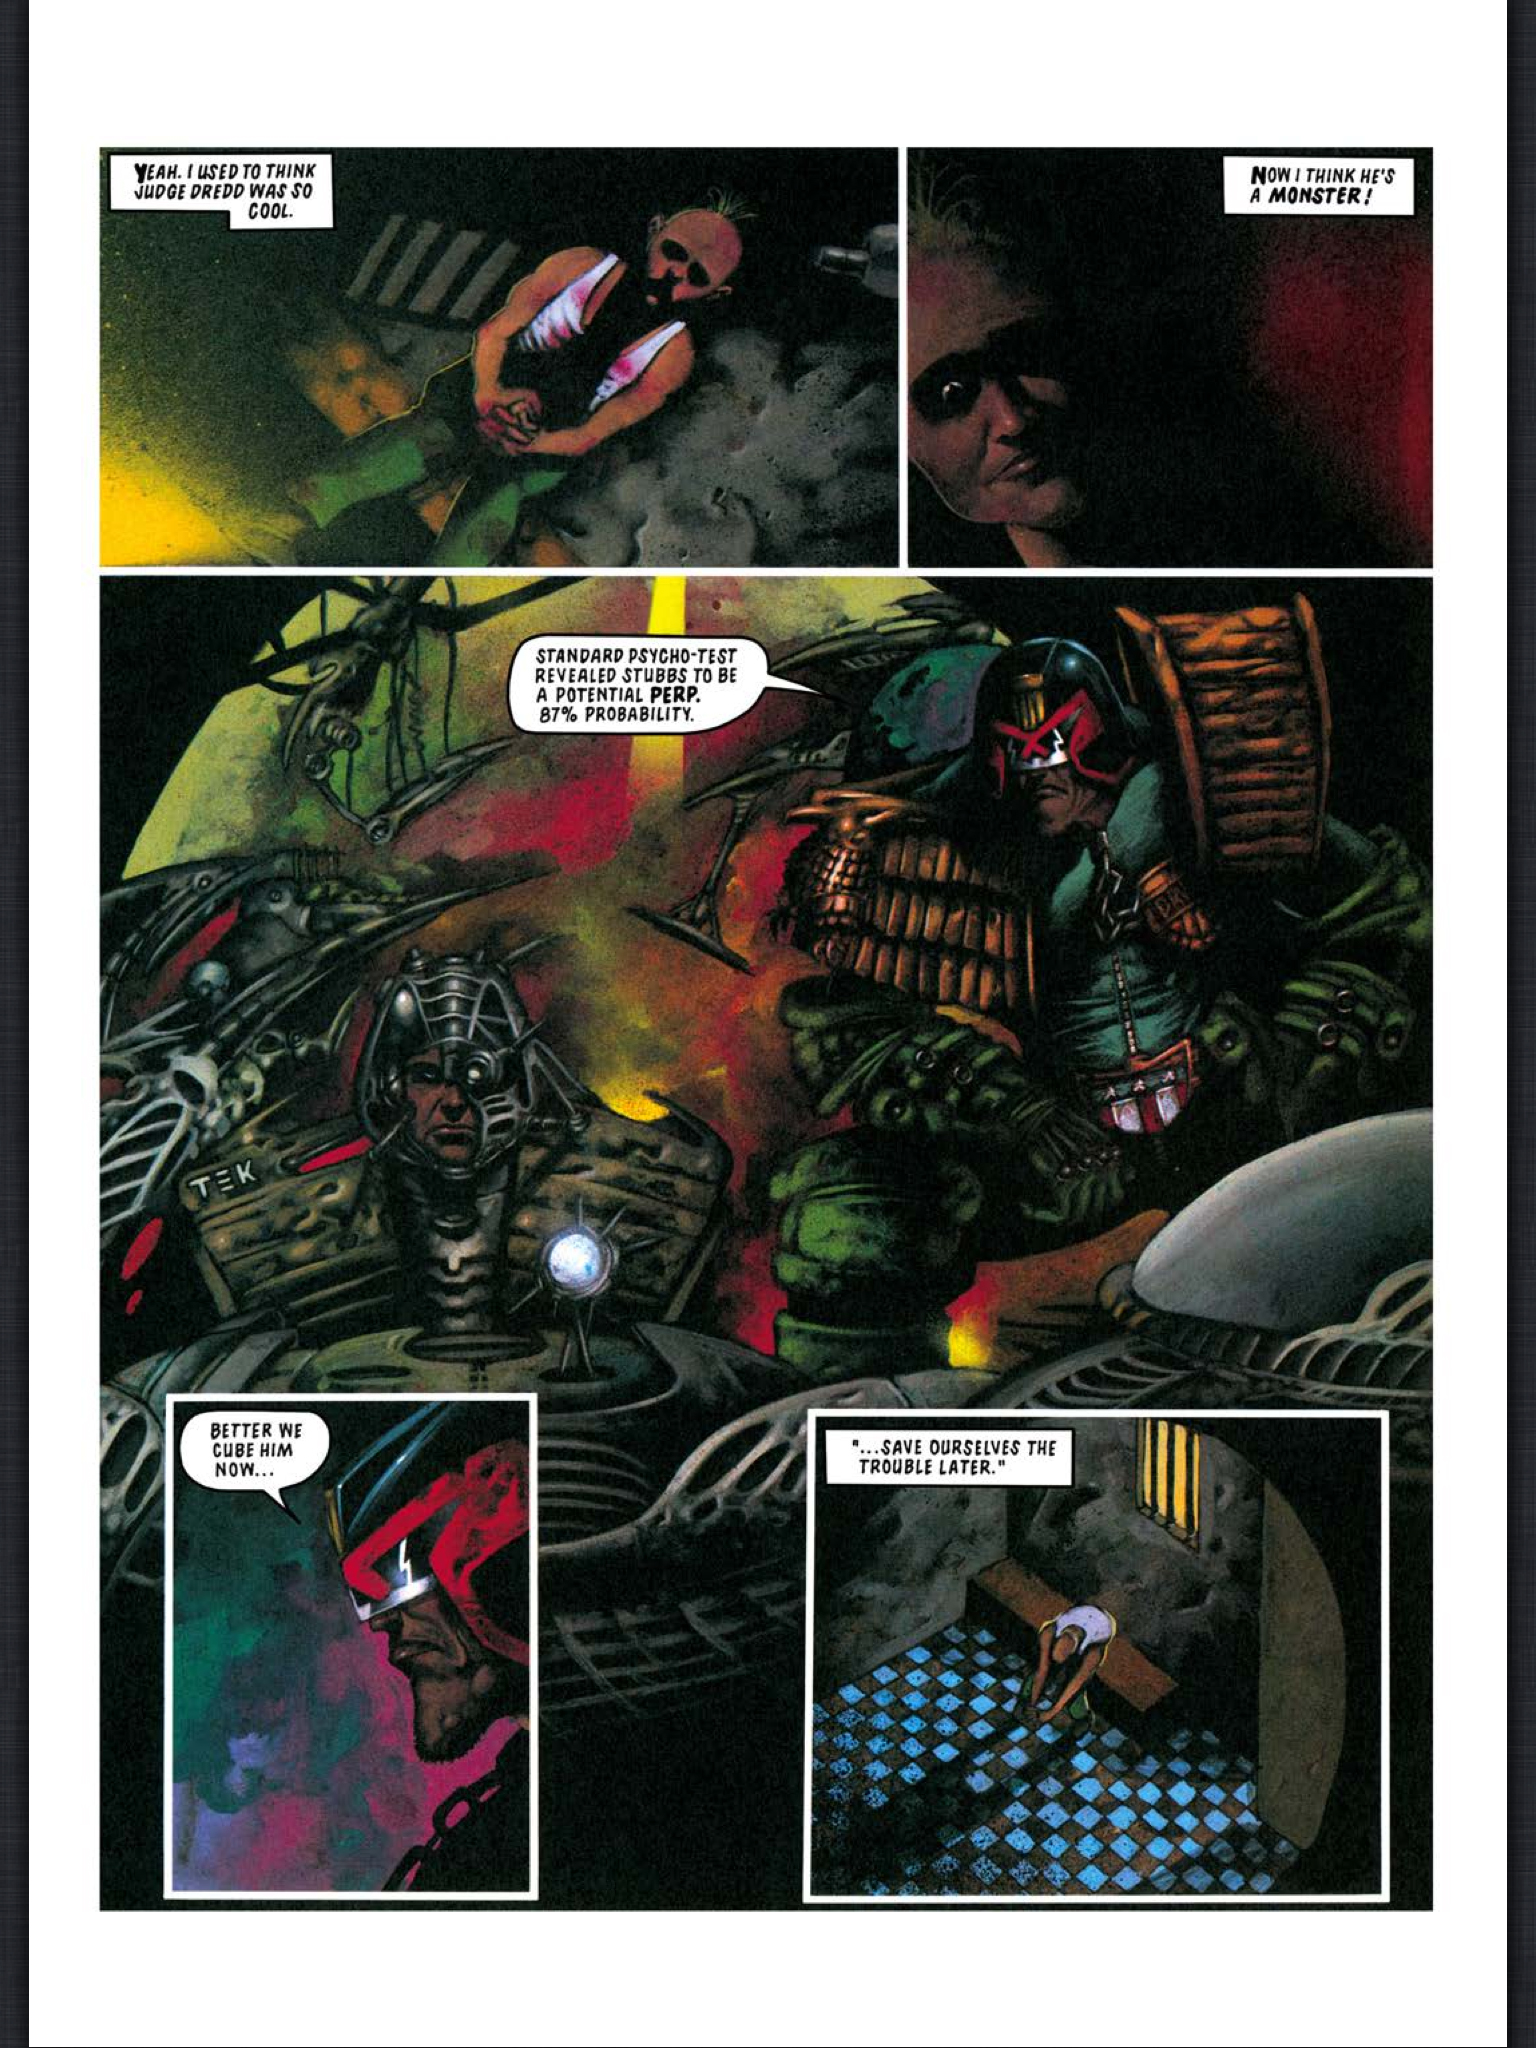 Read online Judge Dredd: The Complete Case Files comic -  Issue # TPB 20 - 108